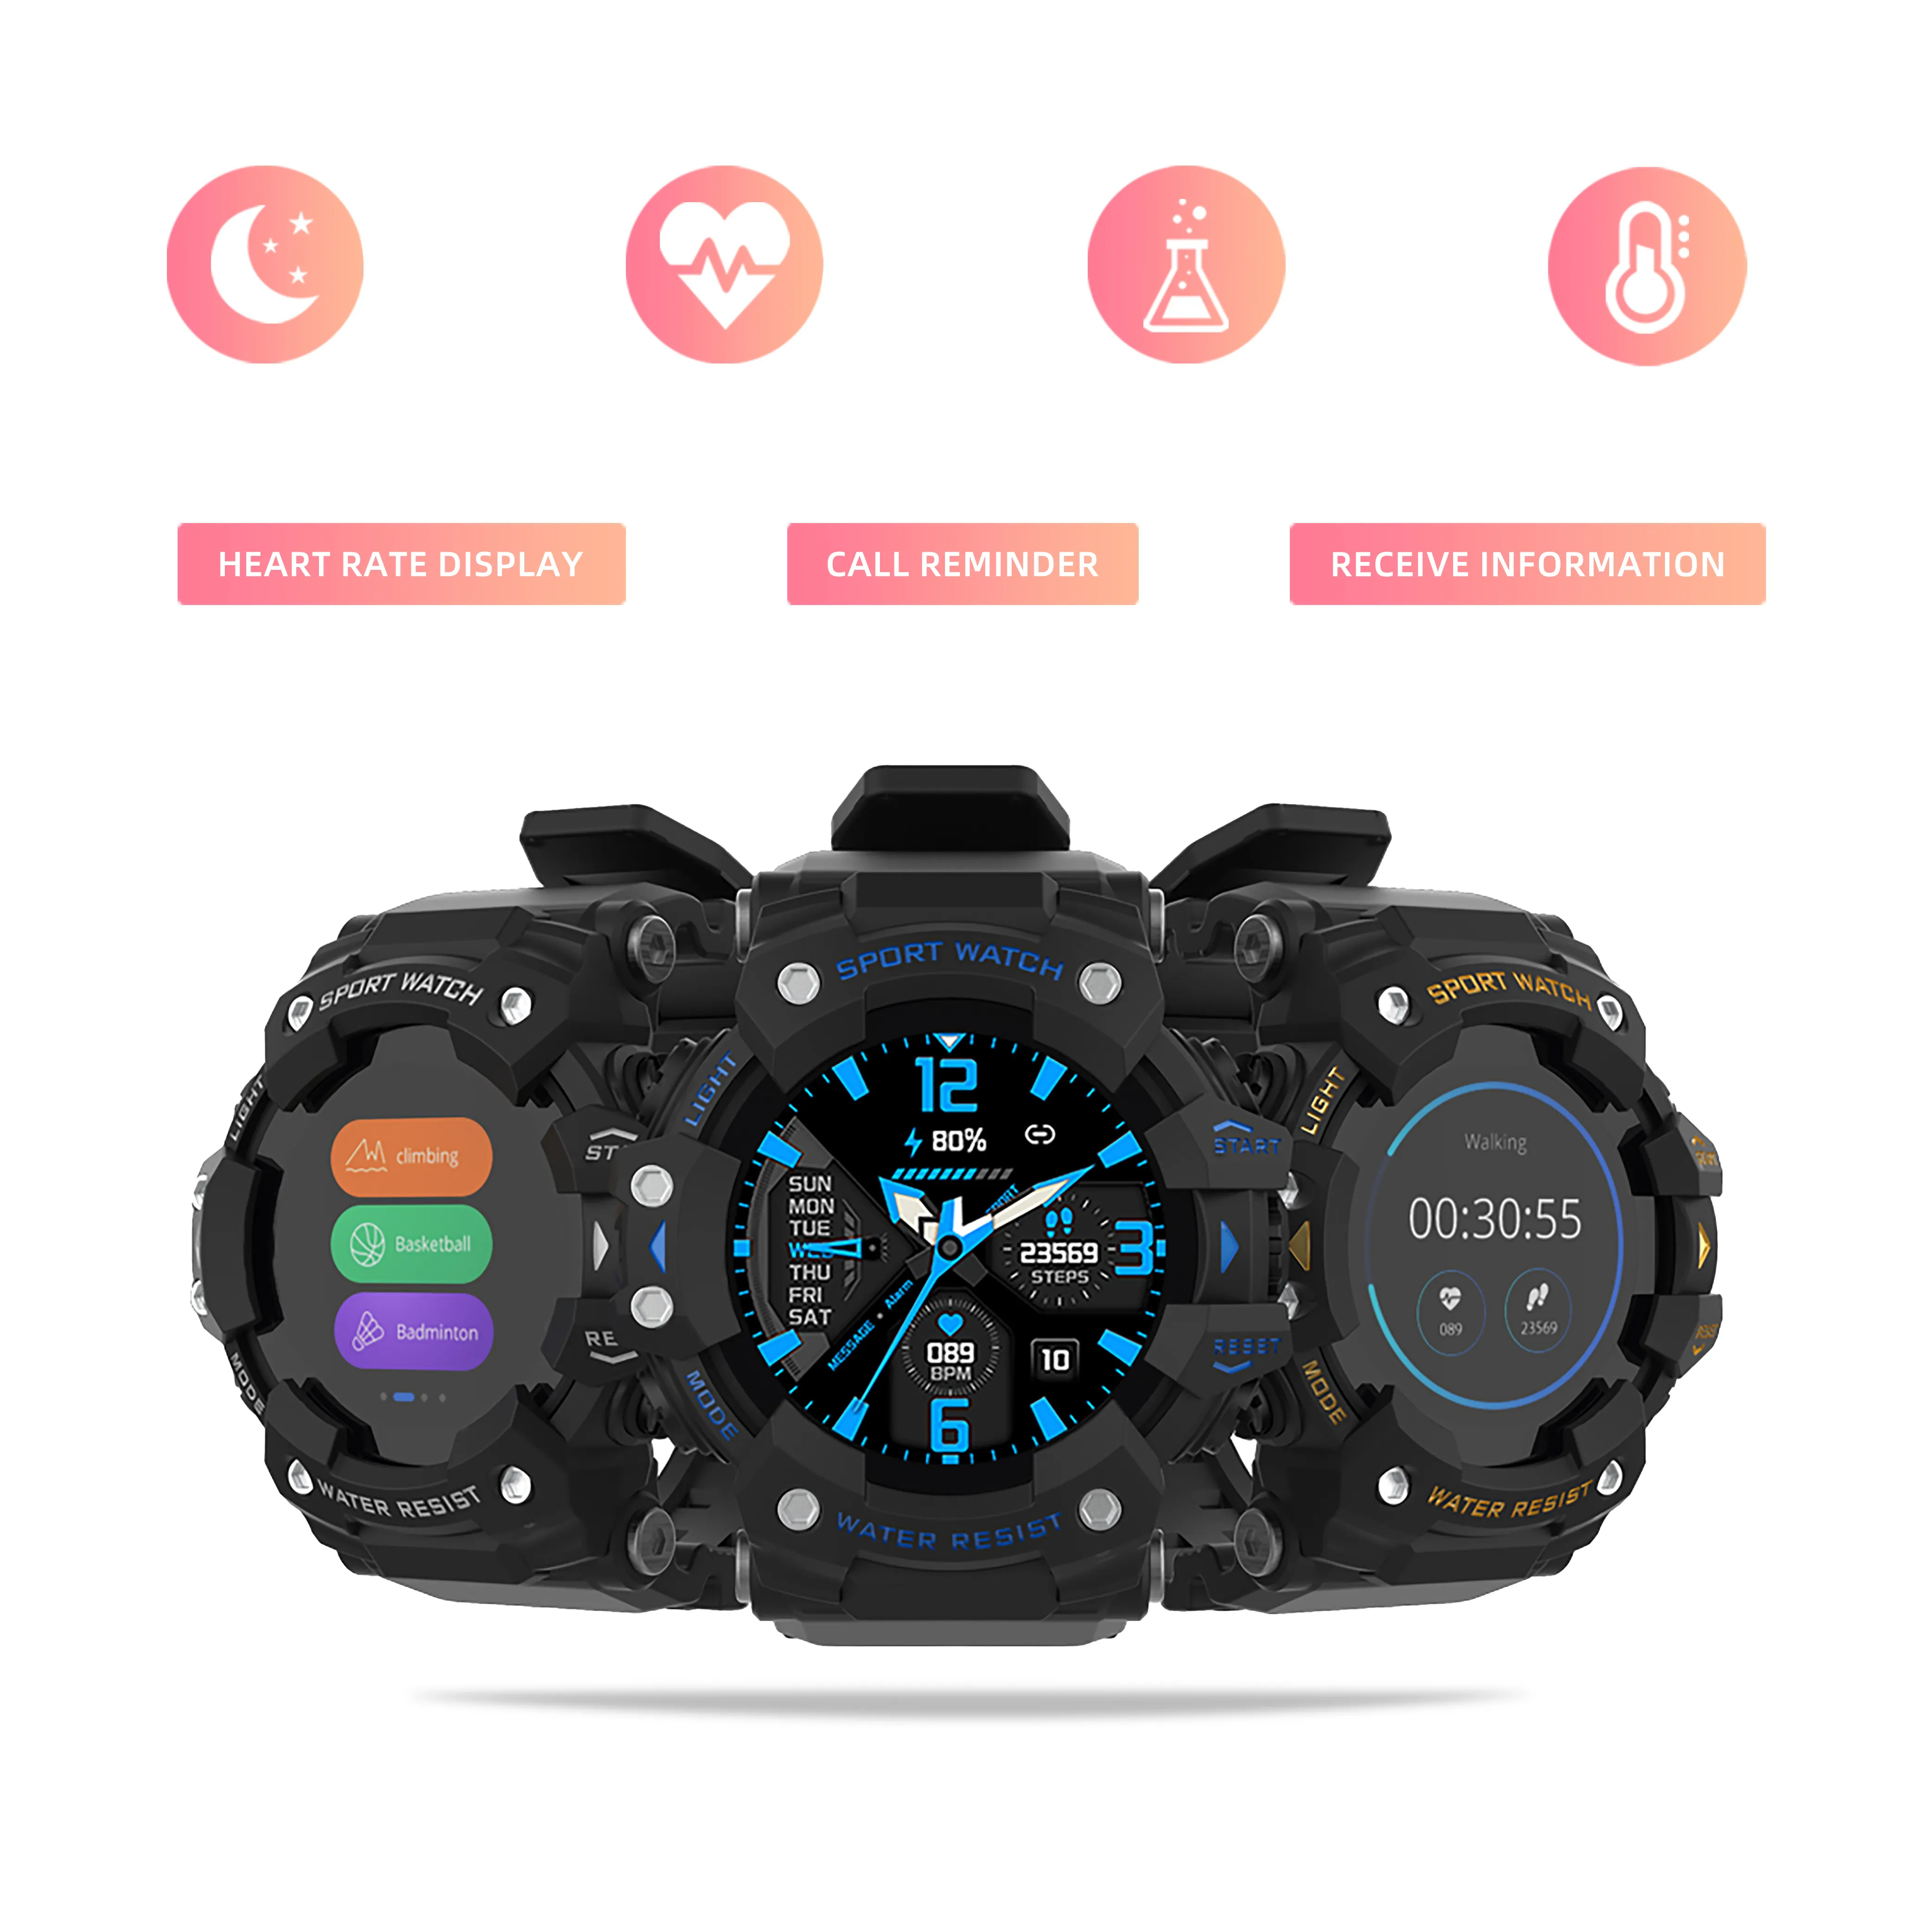 2022 android watch garmin silicone heart rate Fitness Tracker cartoon children's Sport watch For Mens kids led Digital watches